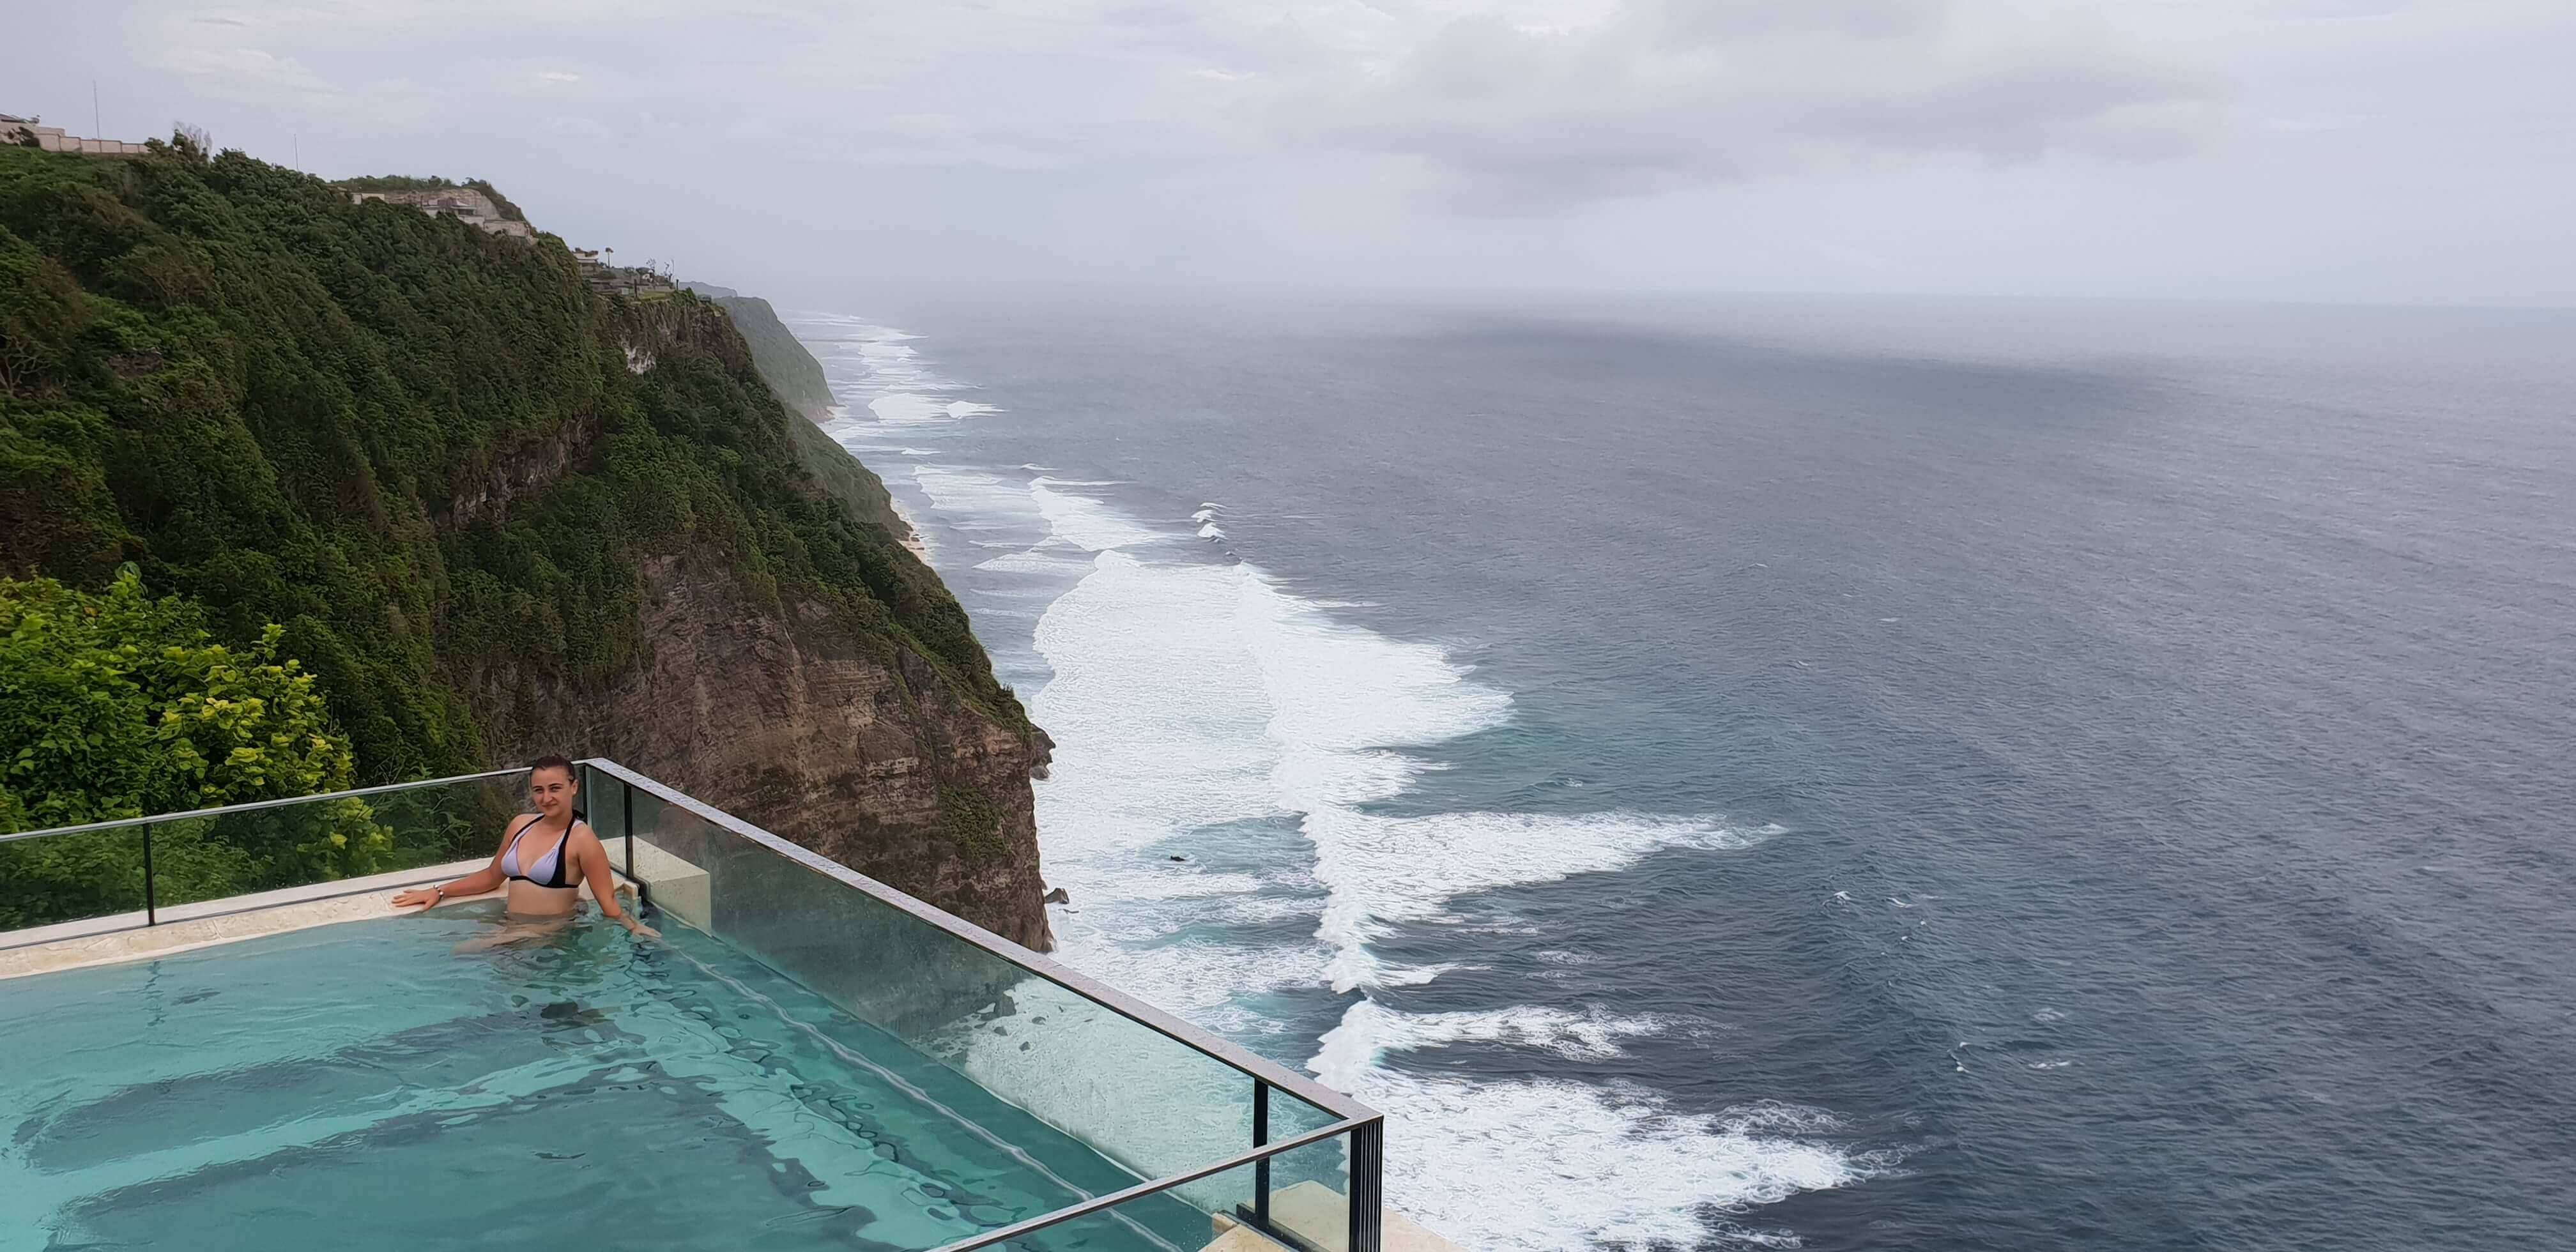 Oneeighty clifftop club is hands down the best beach club not just in Uluwatu but in Bali